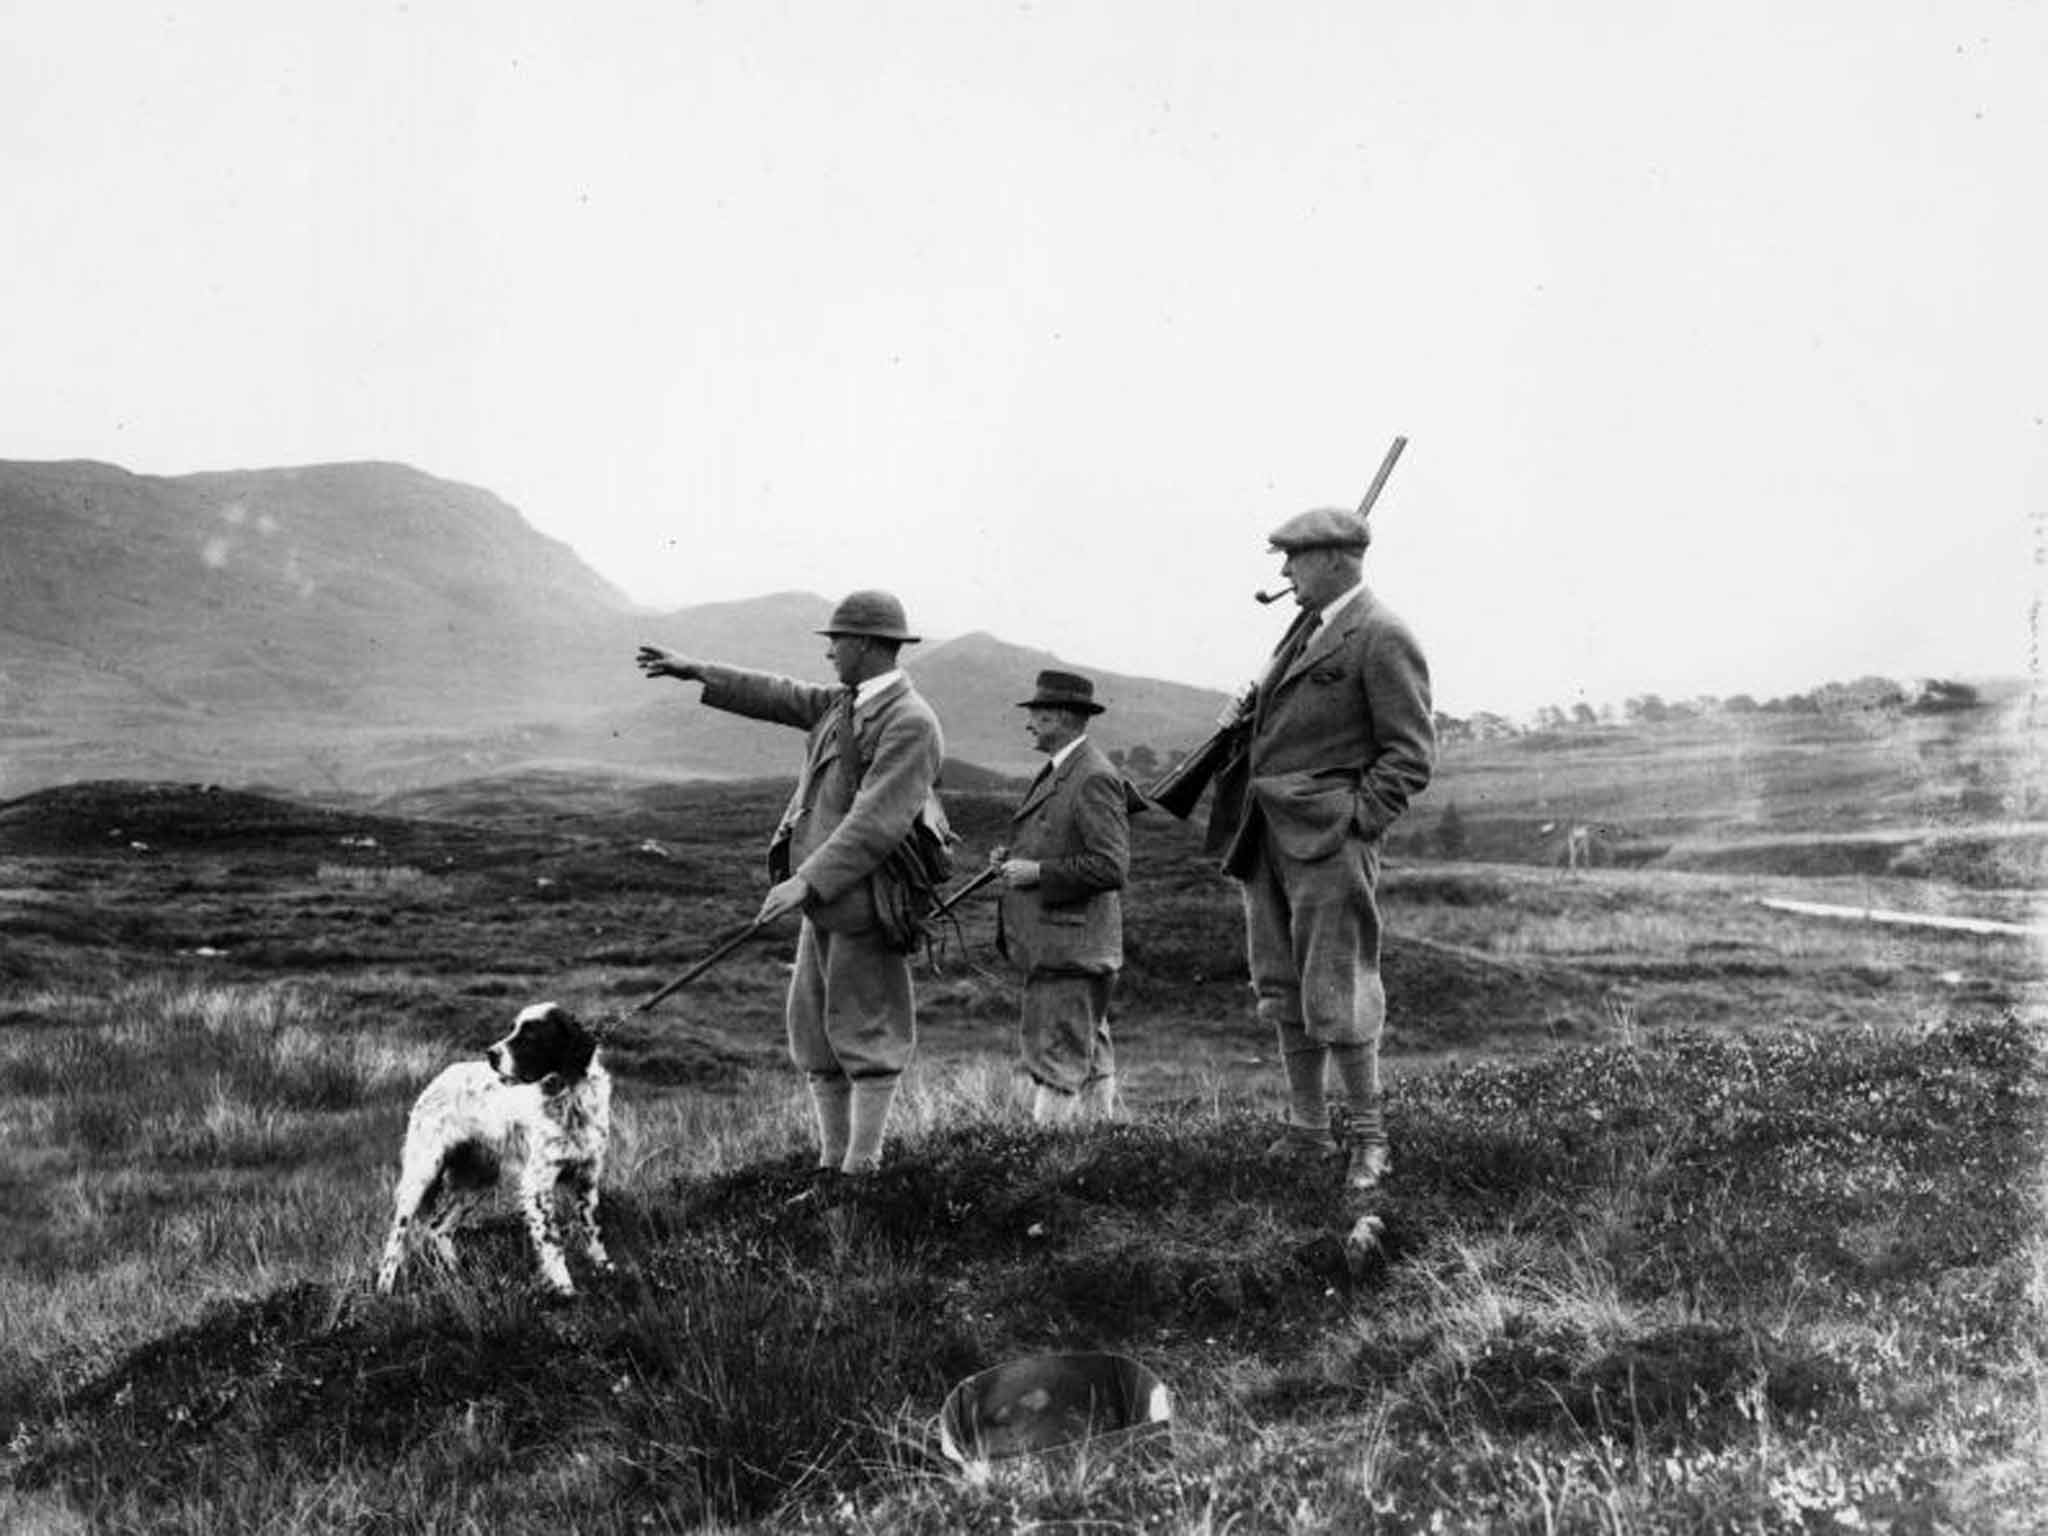 &#13;
A grouse shooting party, circa 1929, at Crianlarich, in Perthshire &#13;